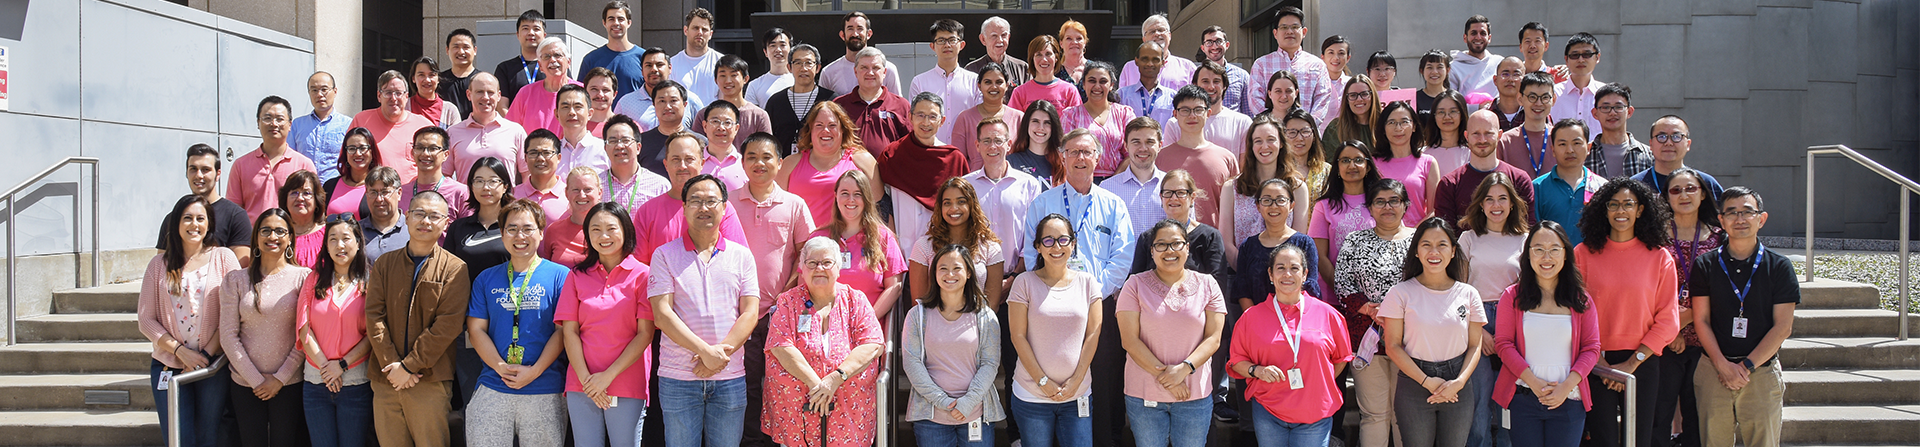 A group photo of the Lester and Sue Smith Breast Cancer Center faculty and staff - 2022